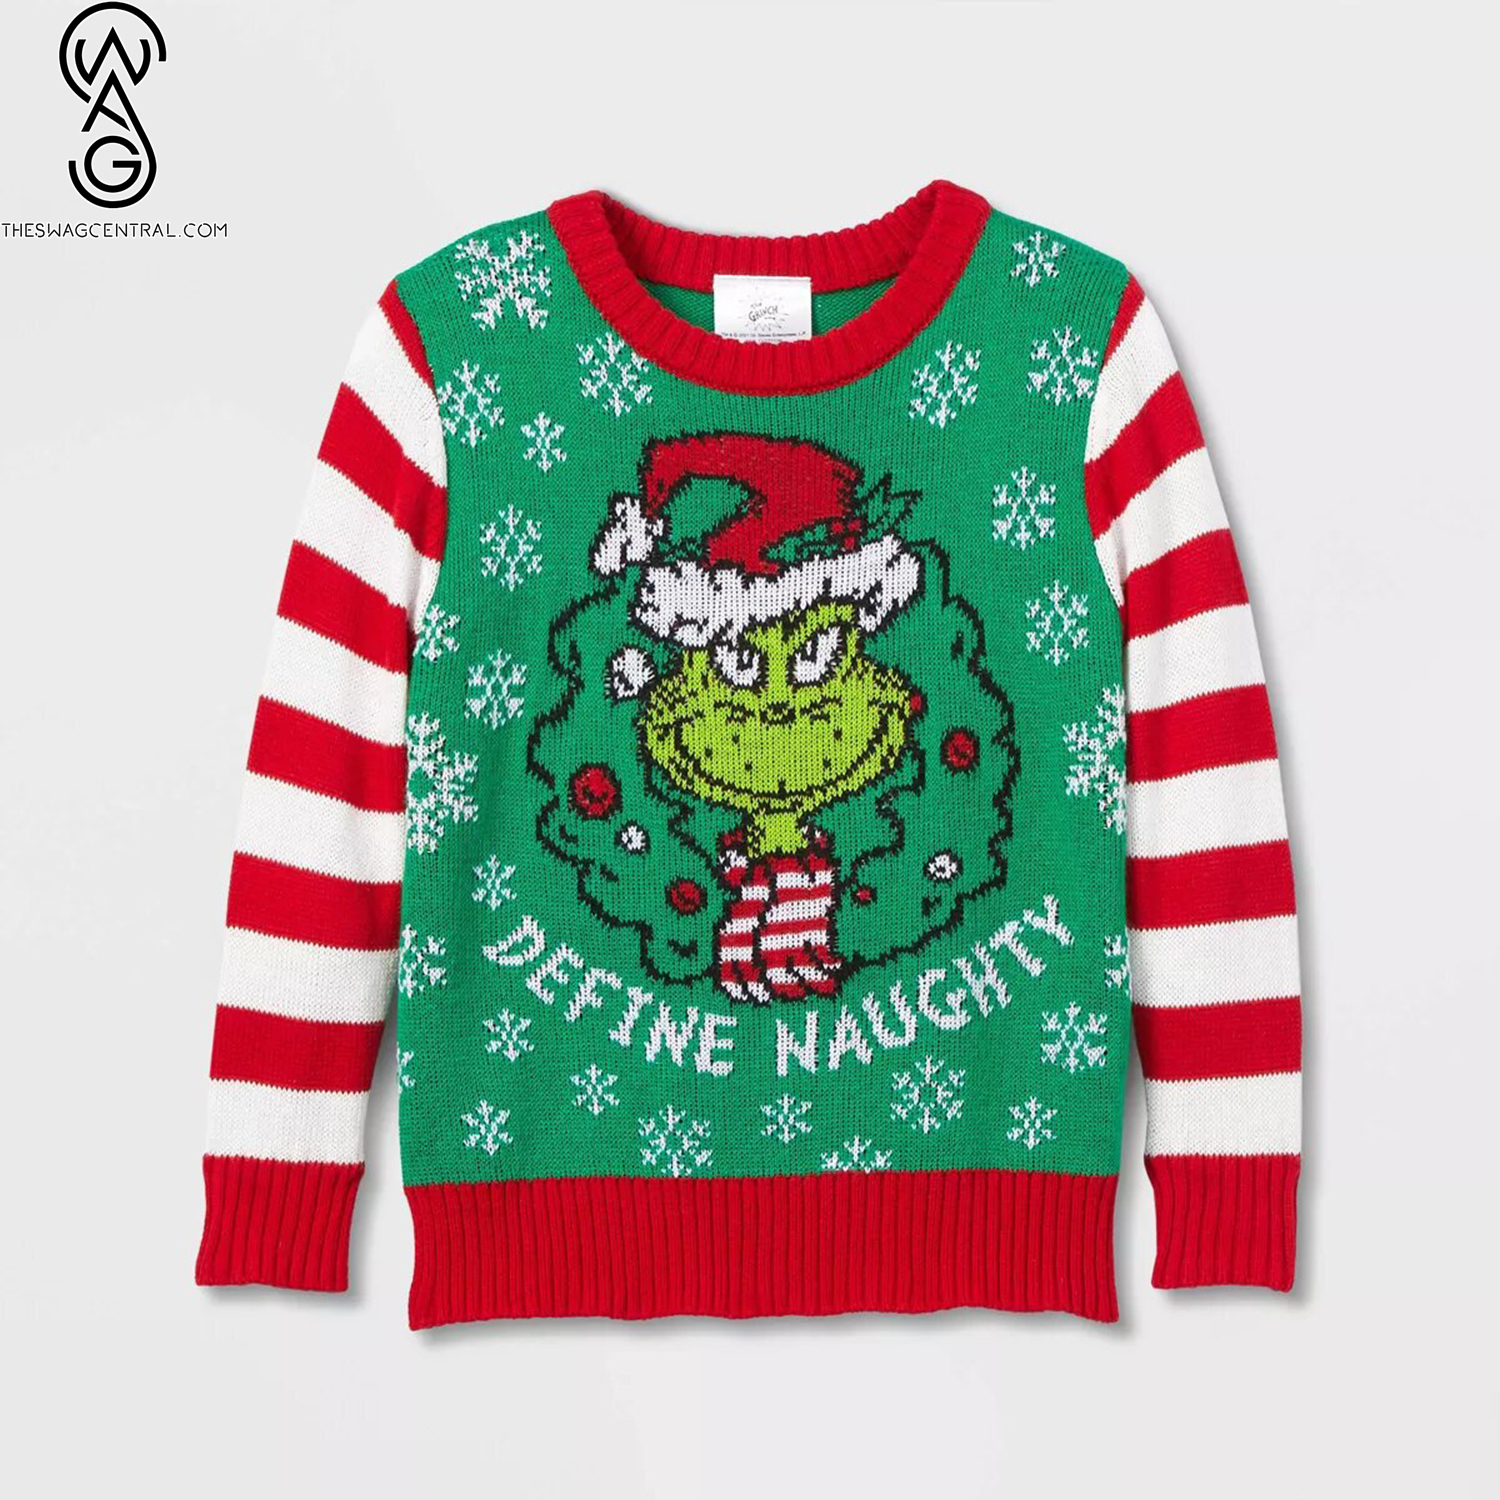 The Grinch Sweater This Christmas Season's Most Festive and Fun Gift Idea!